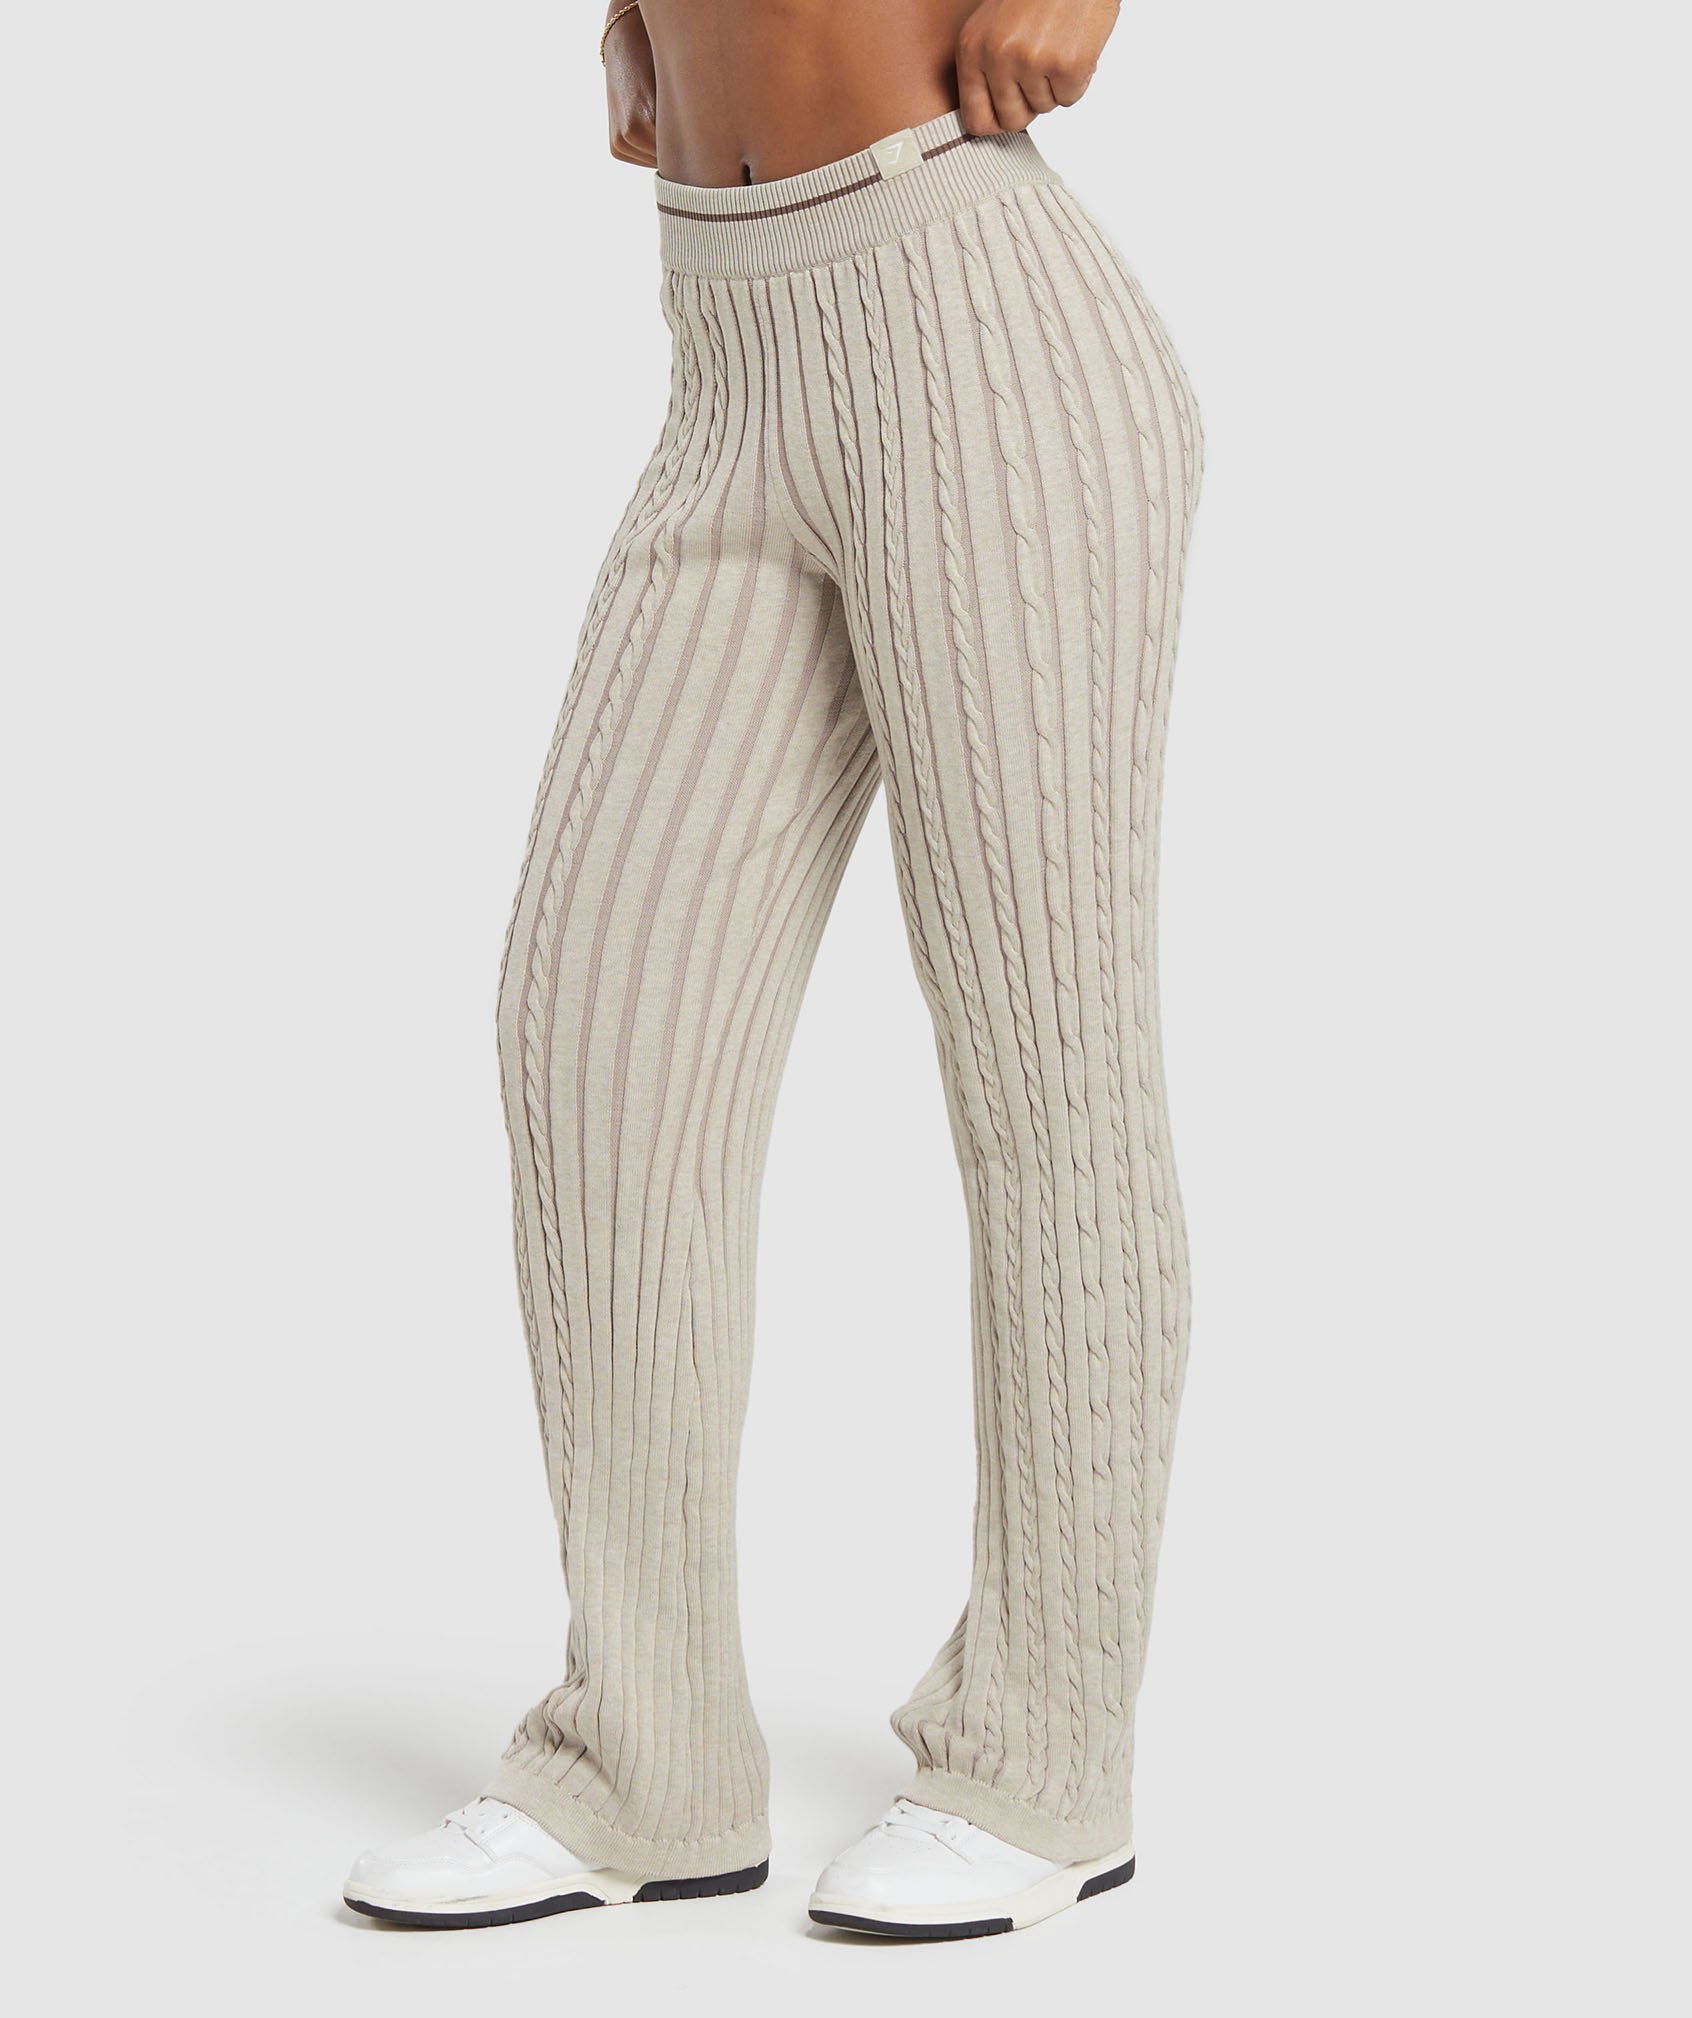 Rest Day Cable Knit Pants in Brown - view 3